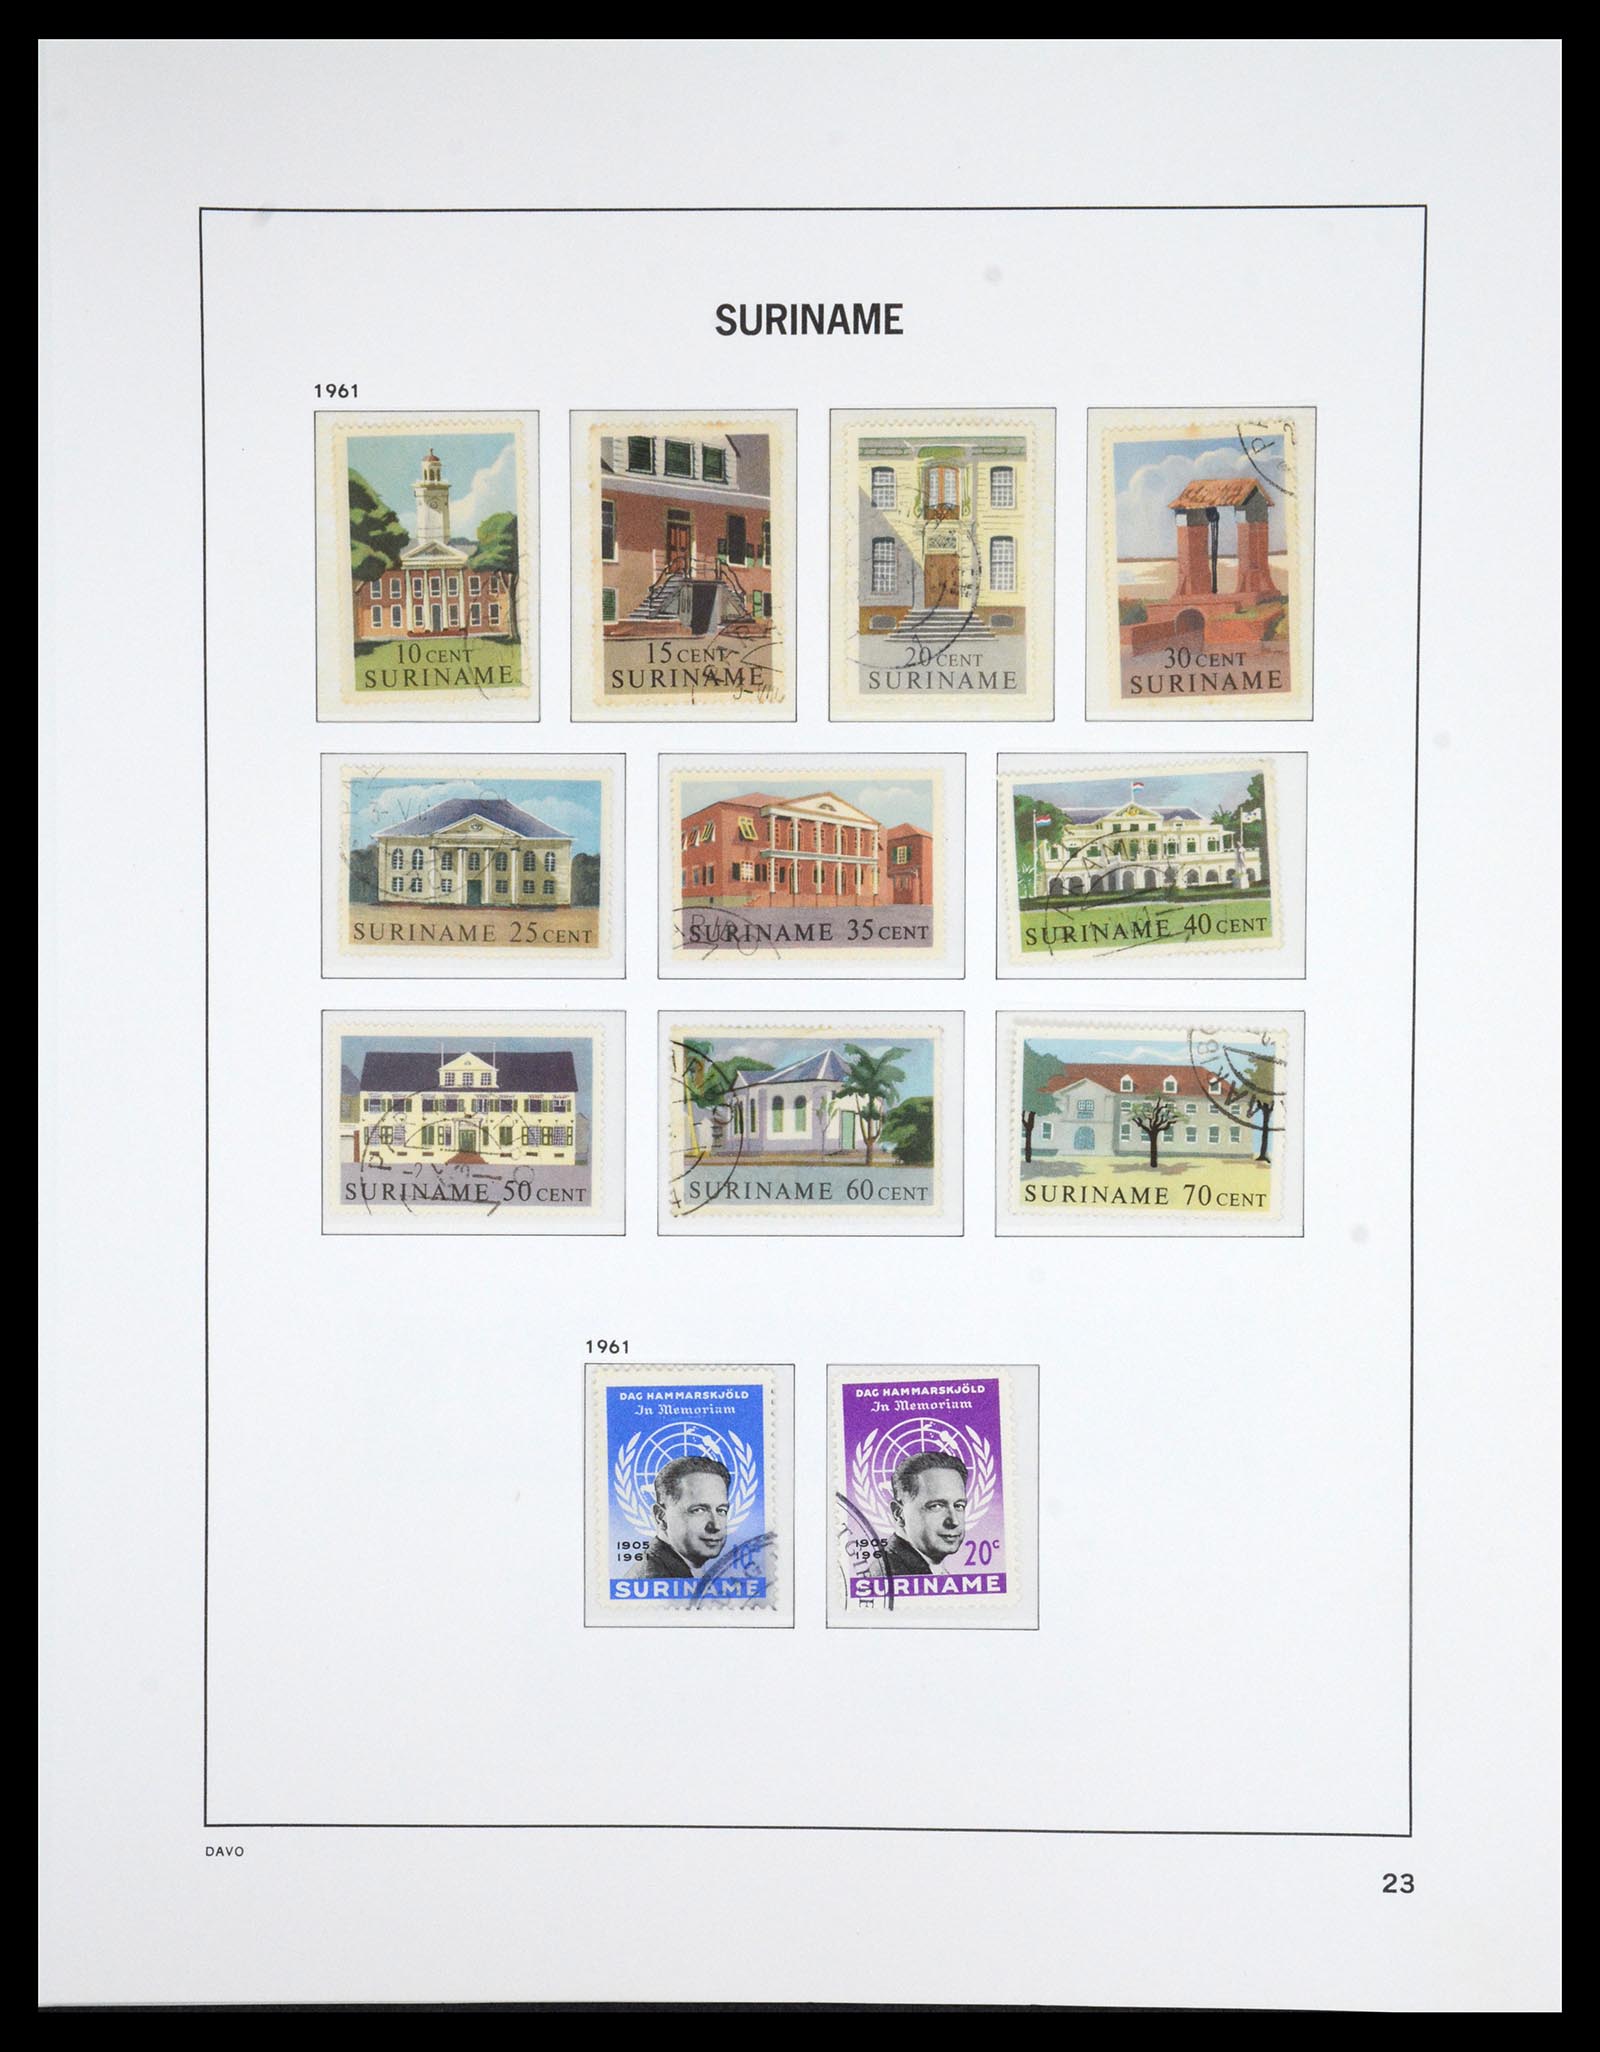 36832 023 - Stamp collection 36832 Suriname 1873-1975.